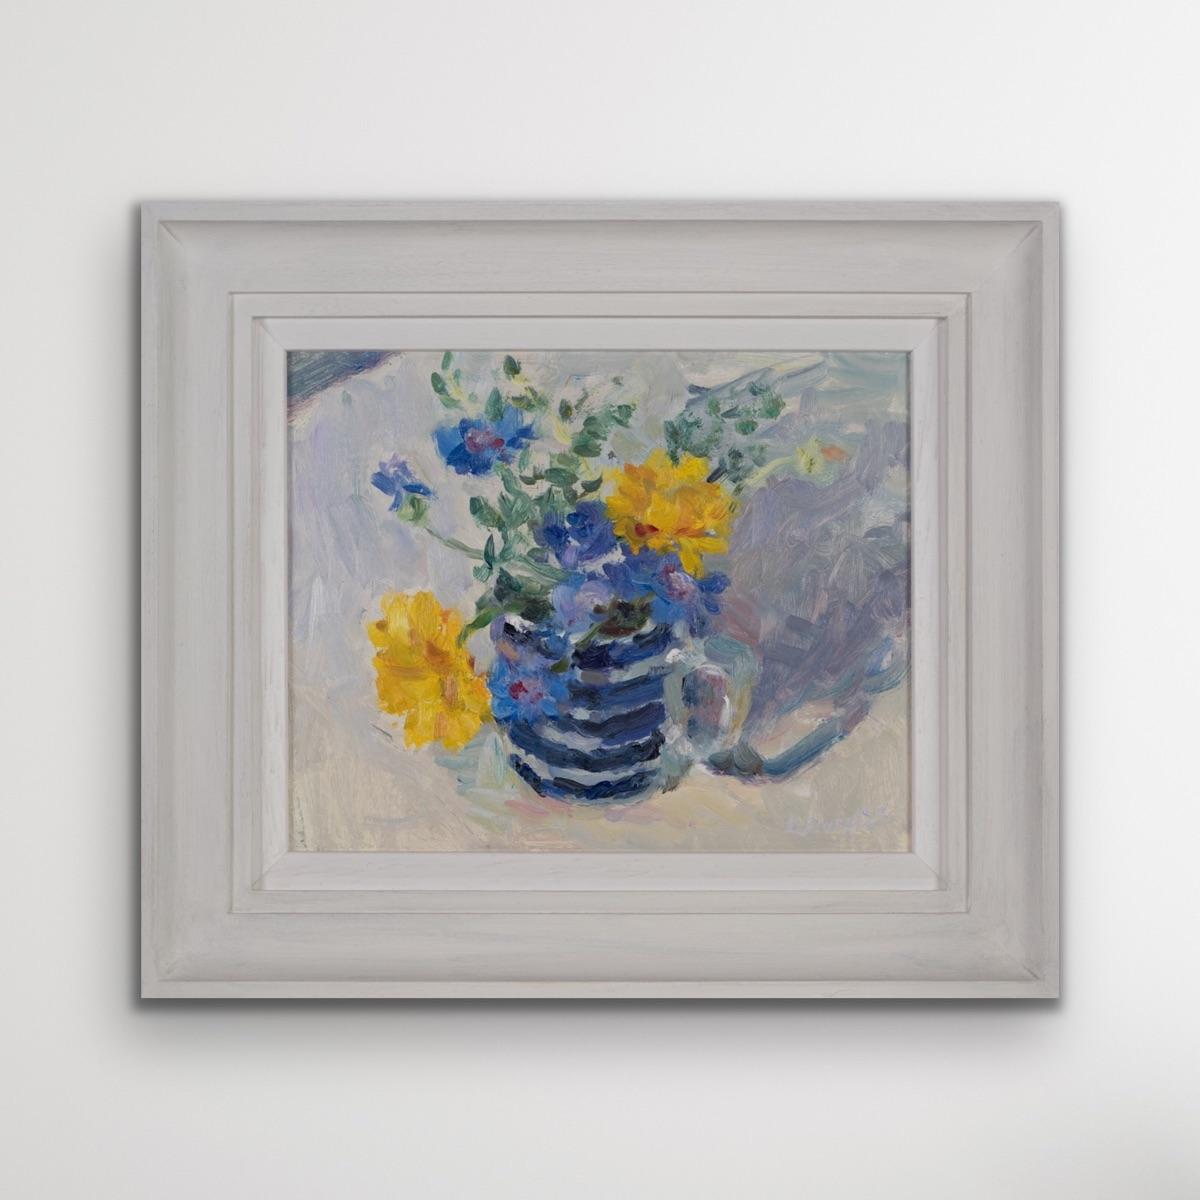 Marigolds, Cornflower and Thyme, Impressionist Style Art, Still Life Floral Art - Gray Landscape Painting by Lynne Cartlidge 